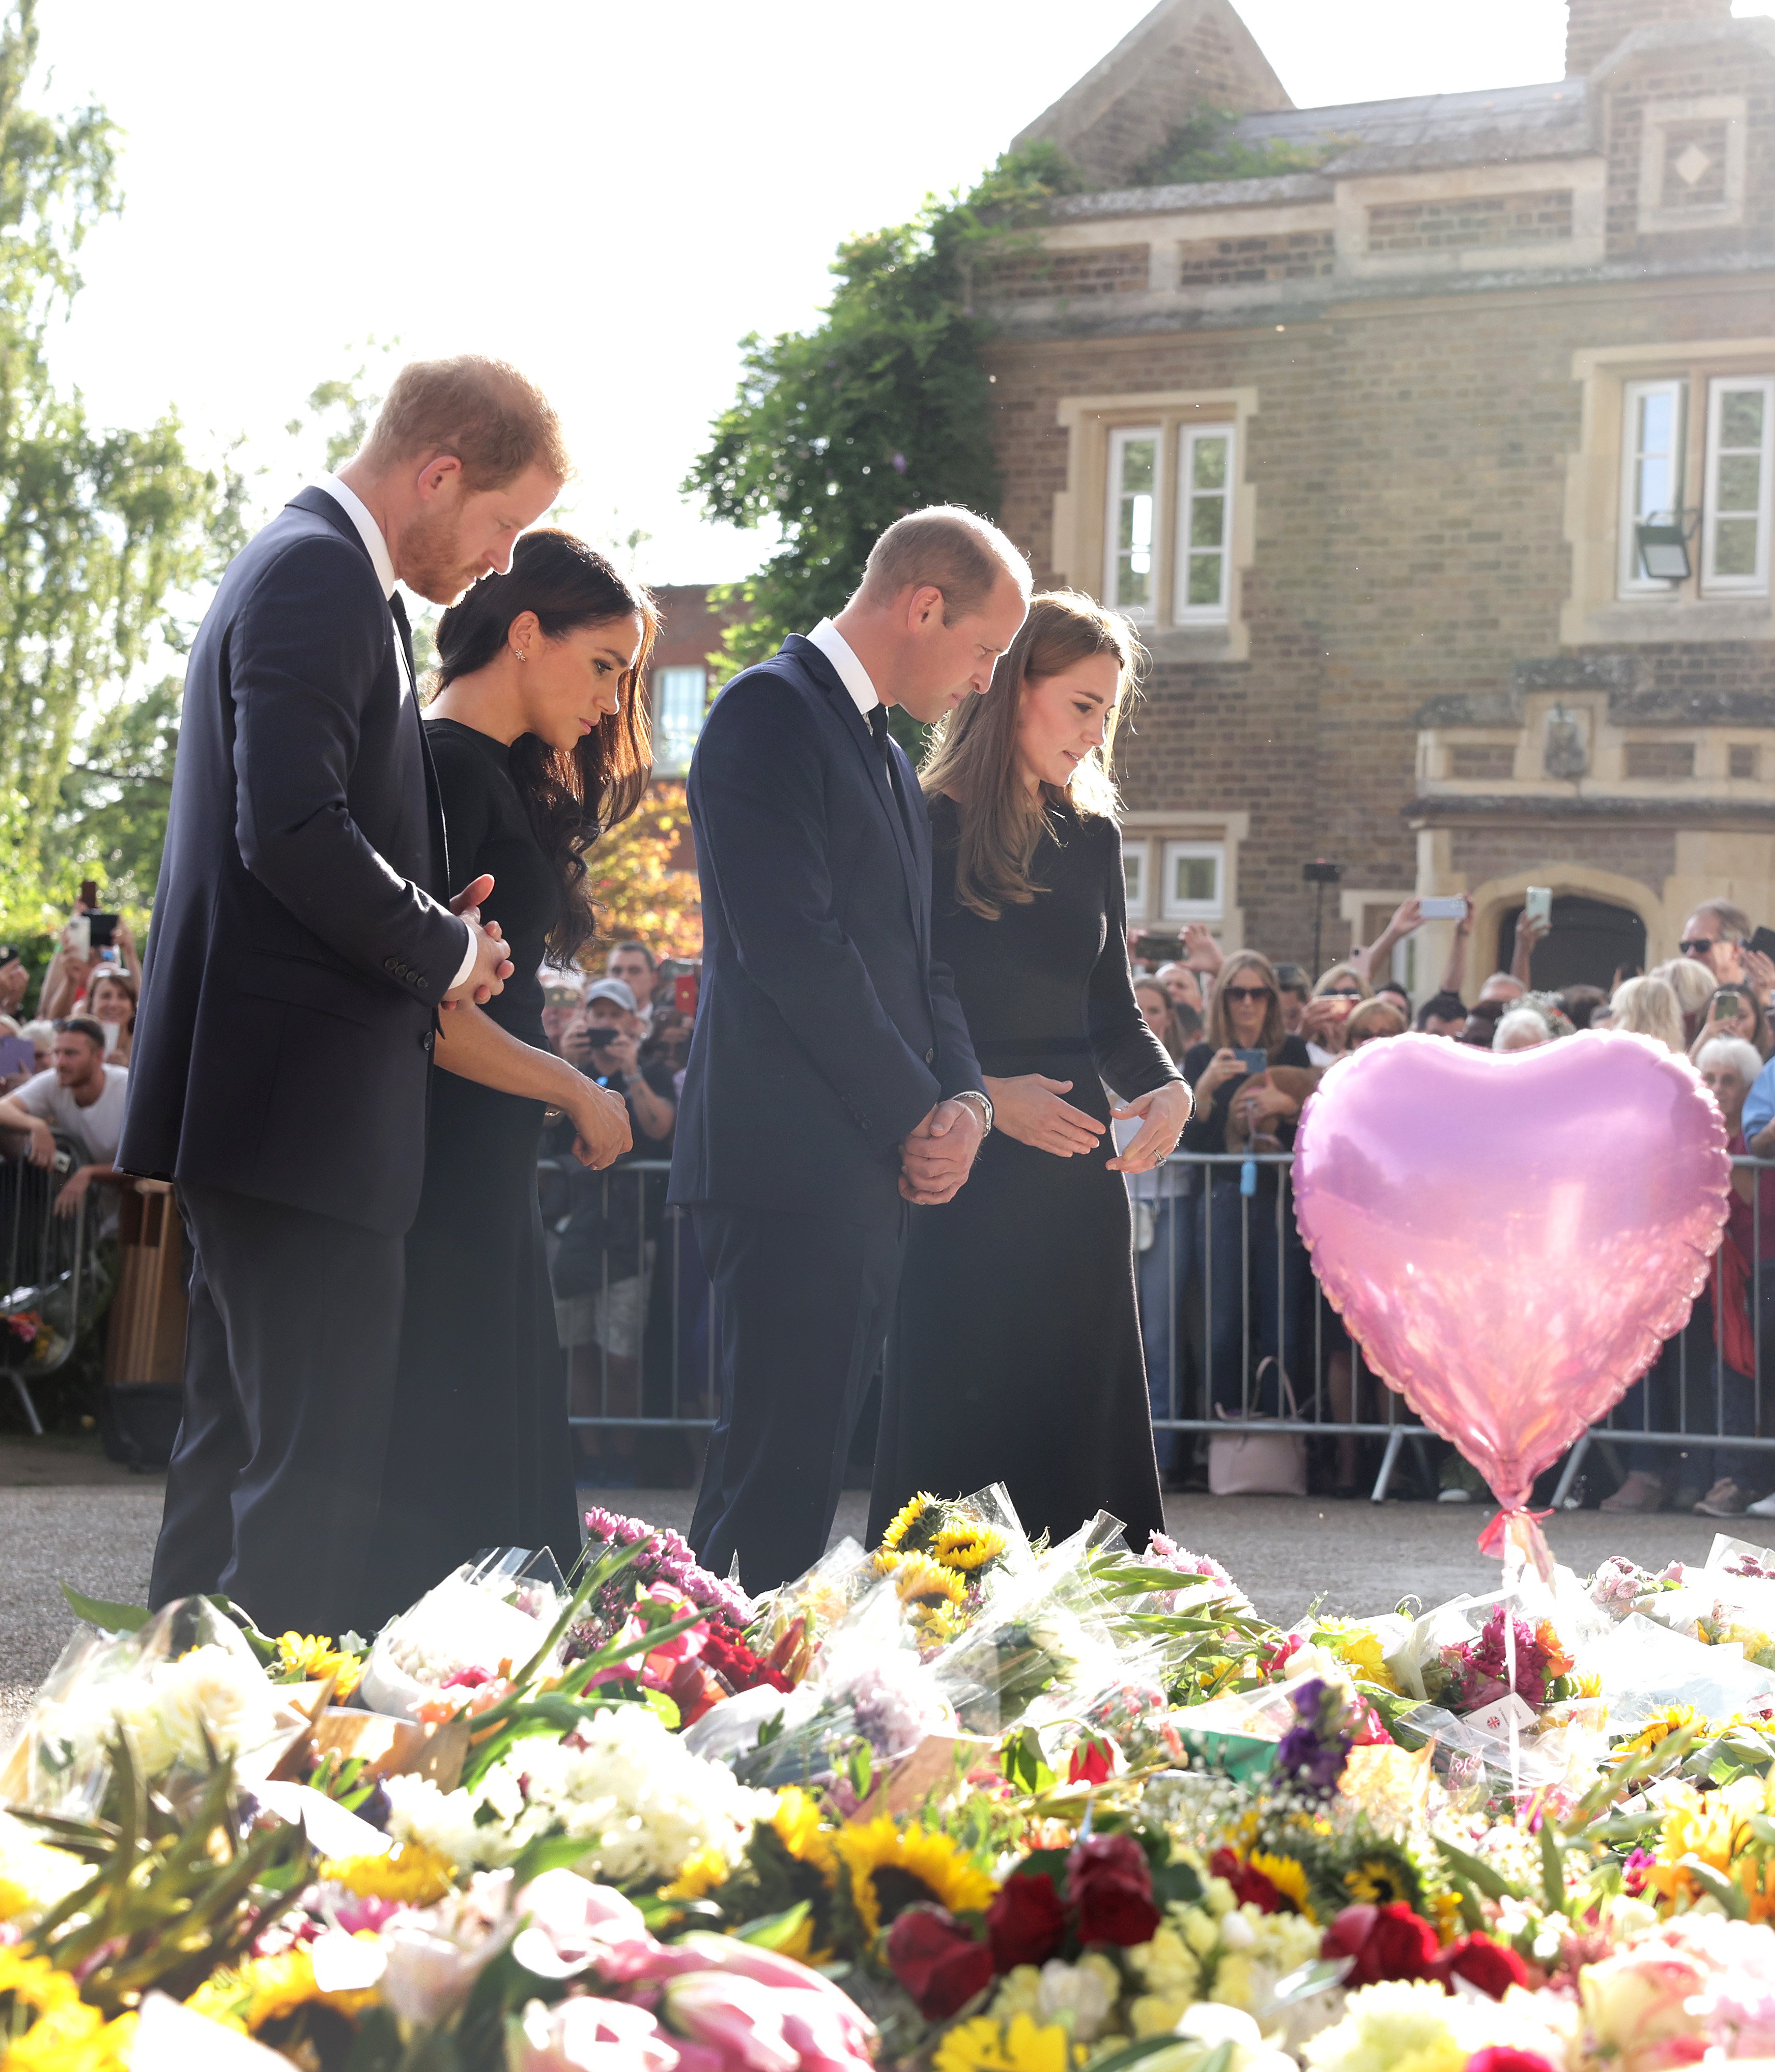 Princess Kate, Prince William, Prince Harry, and Duchess Meghan viewing flowers and tributes to Queen Elizabeth II at Windsor Castle on September 10, 2022, in Windsor, England | Source: Getty Images